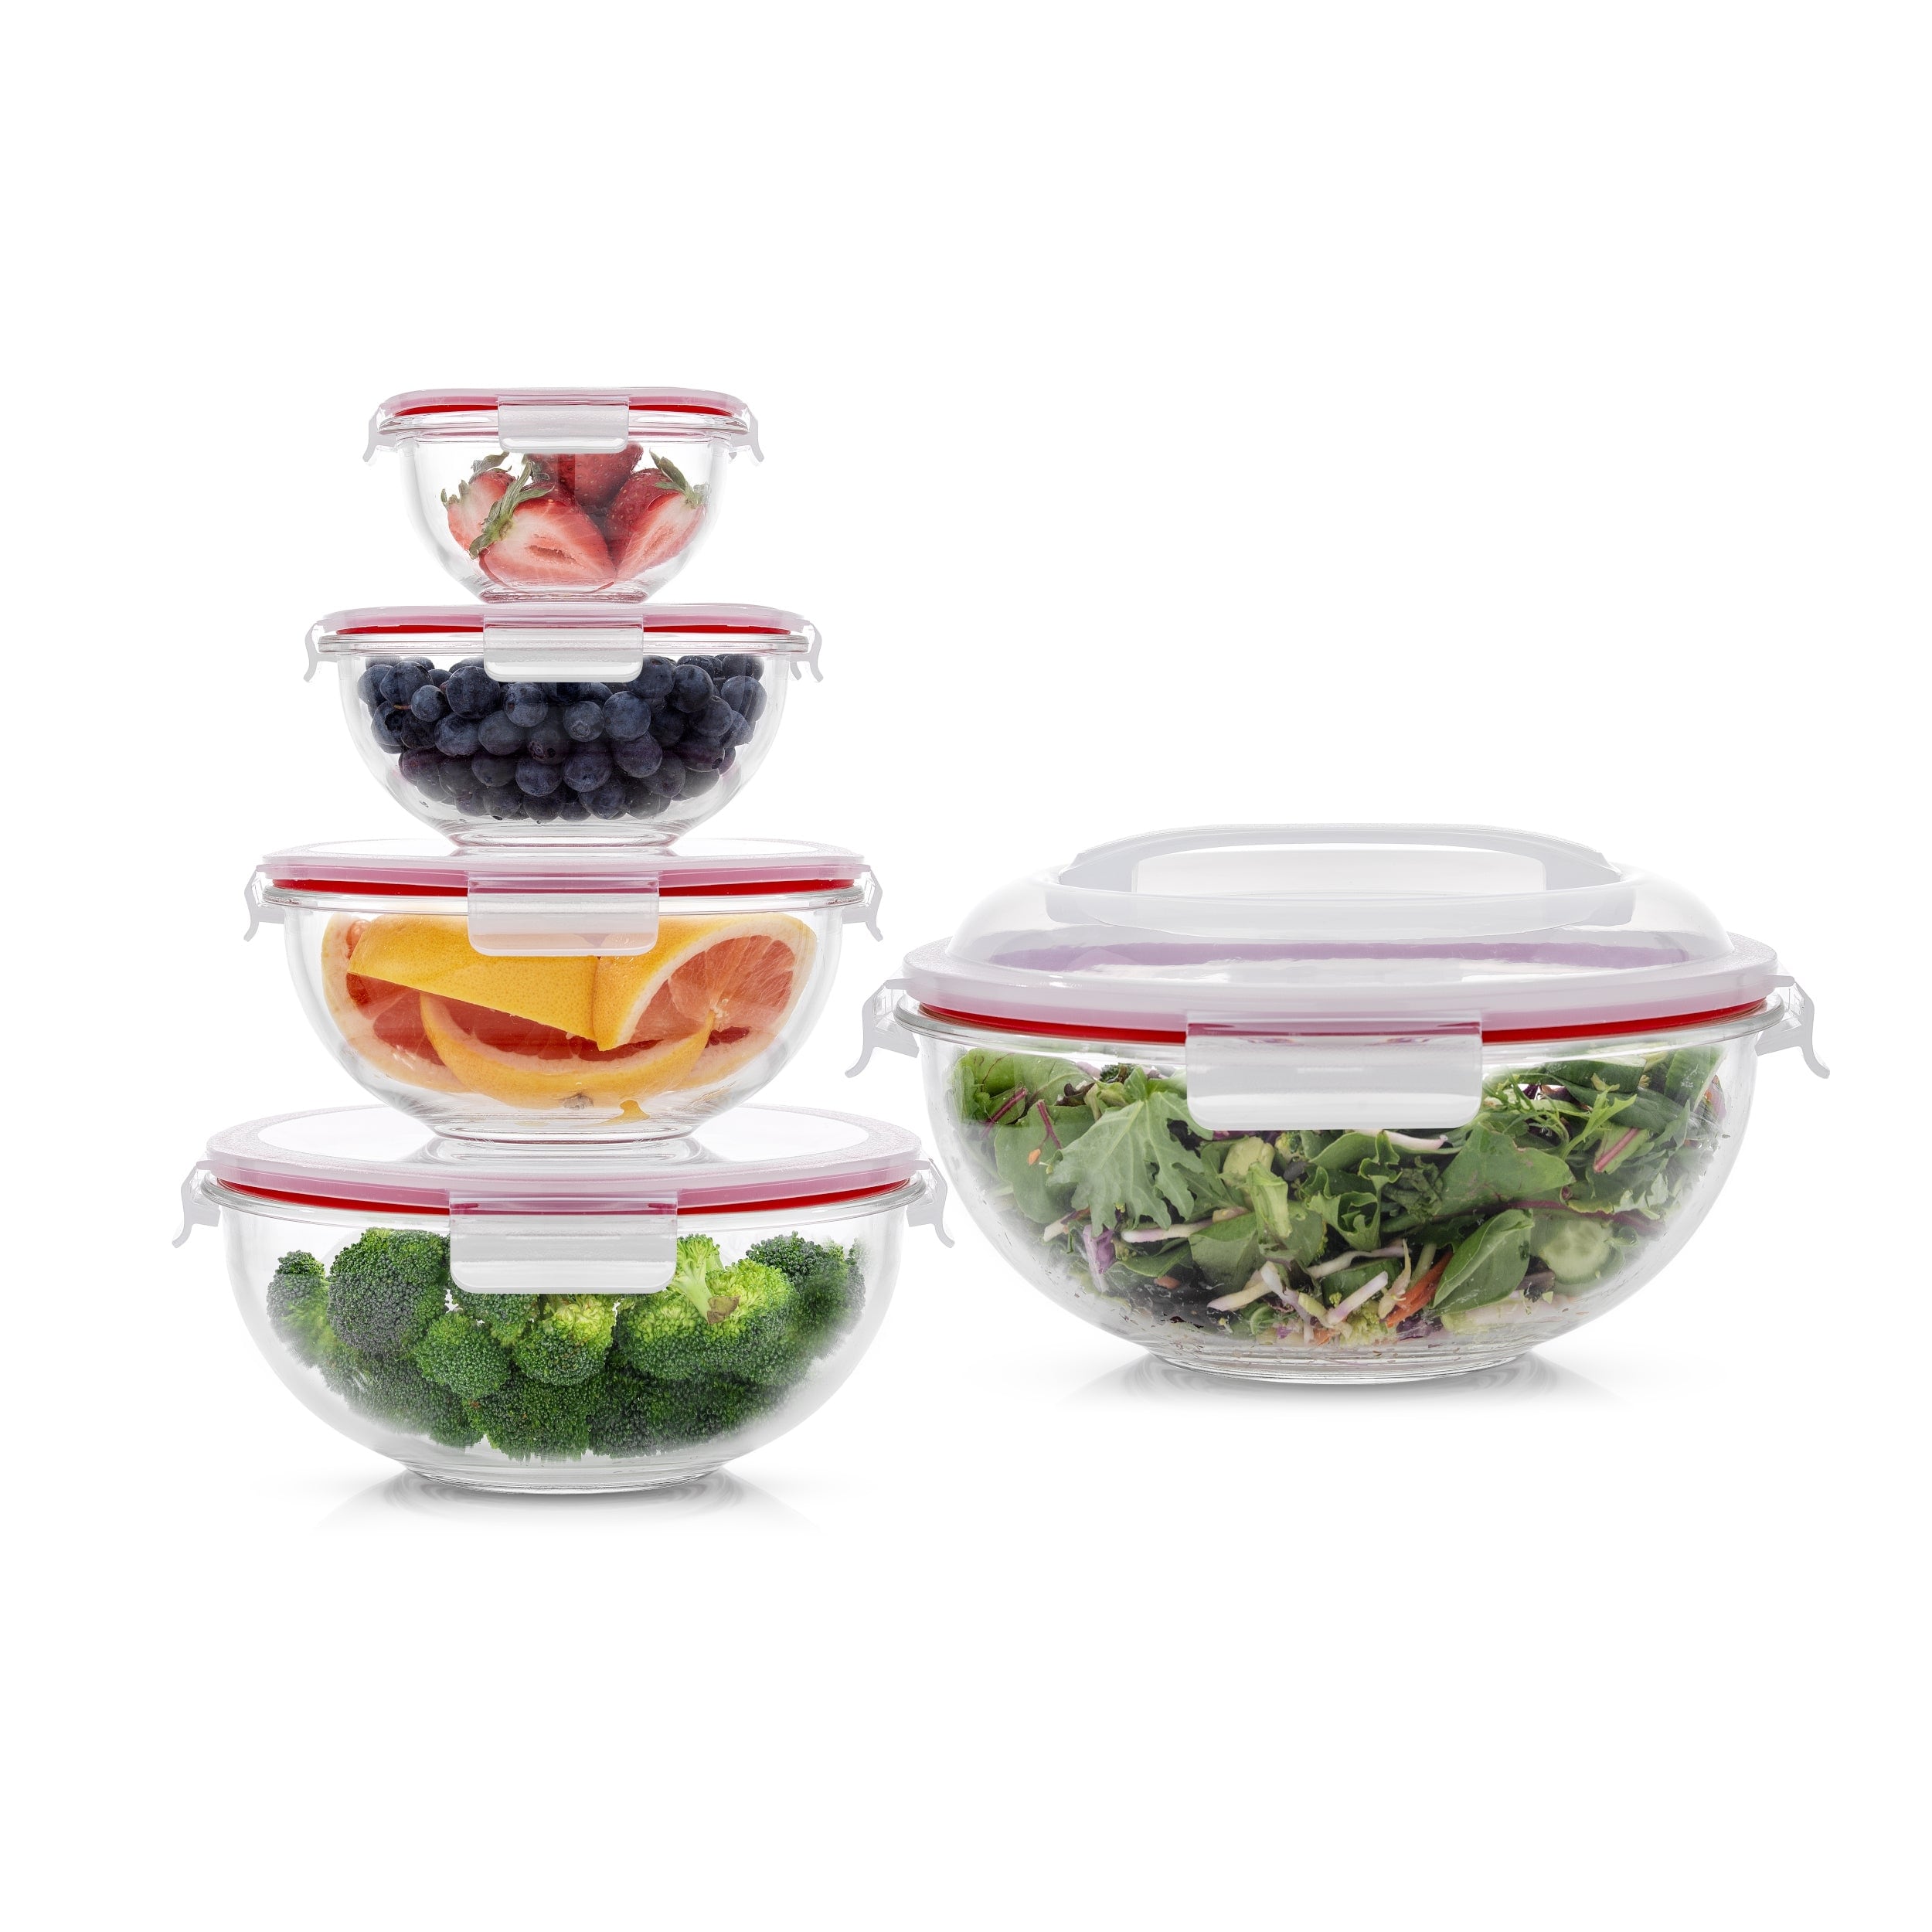 JoyJolt Meal Prep Food Storage Containers - Set of 5